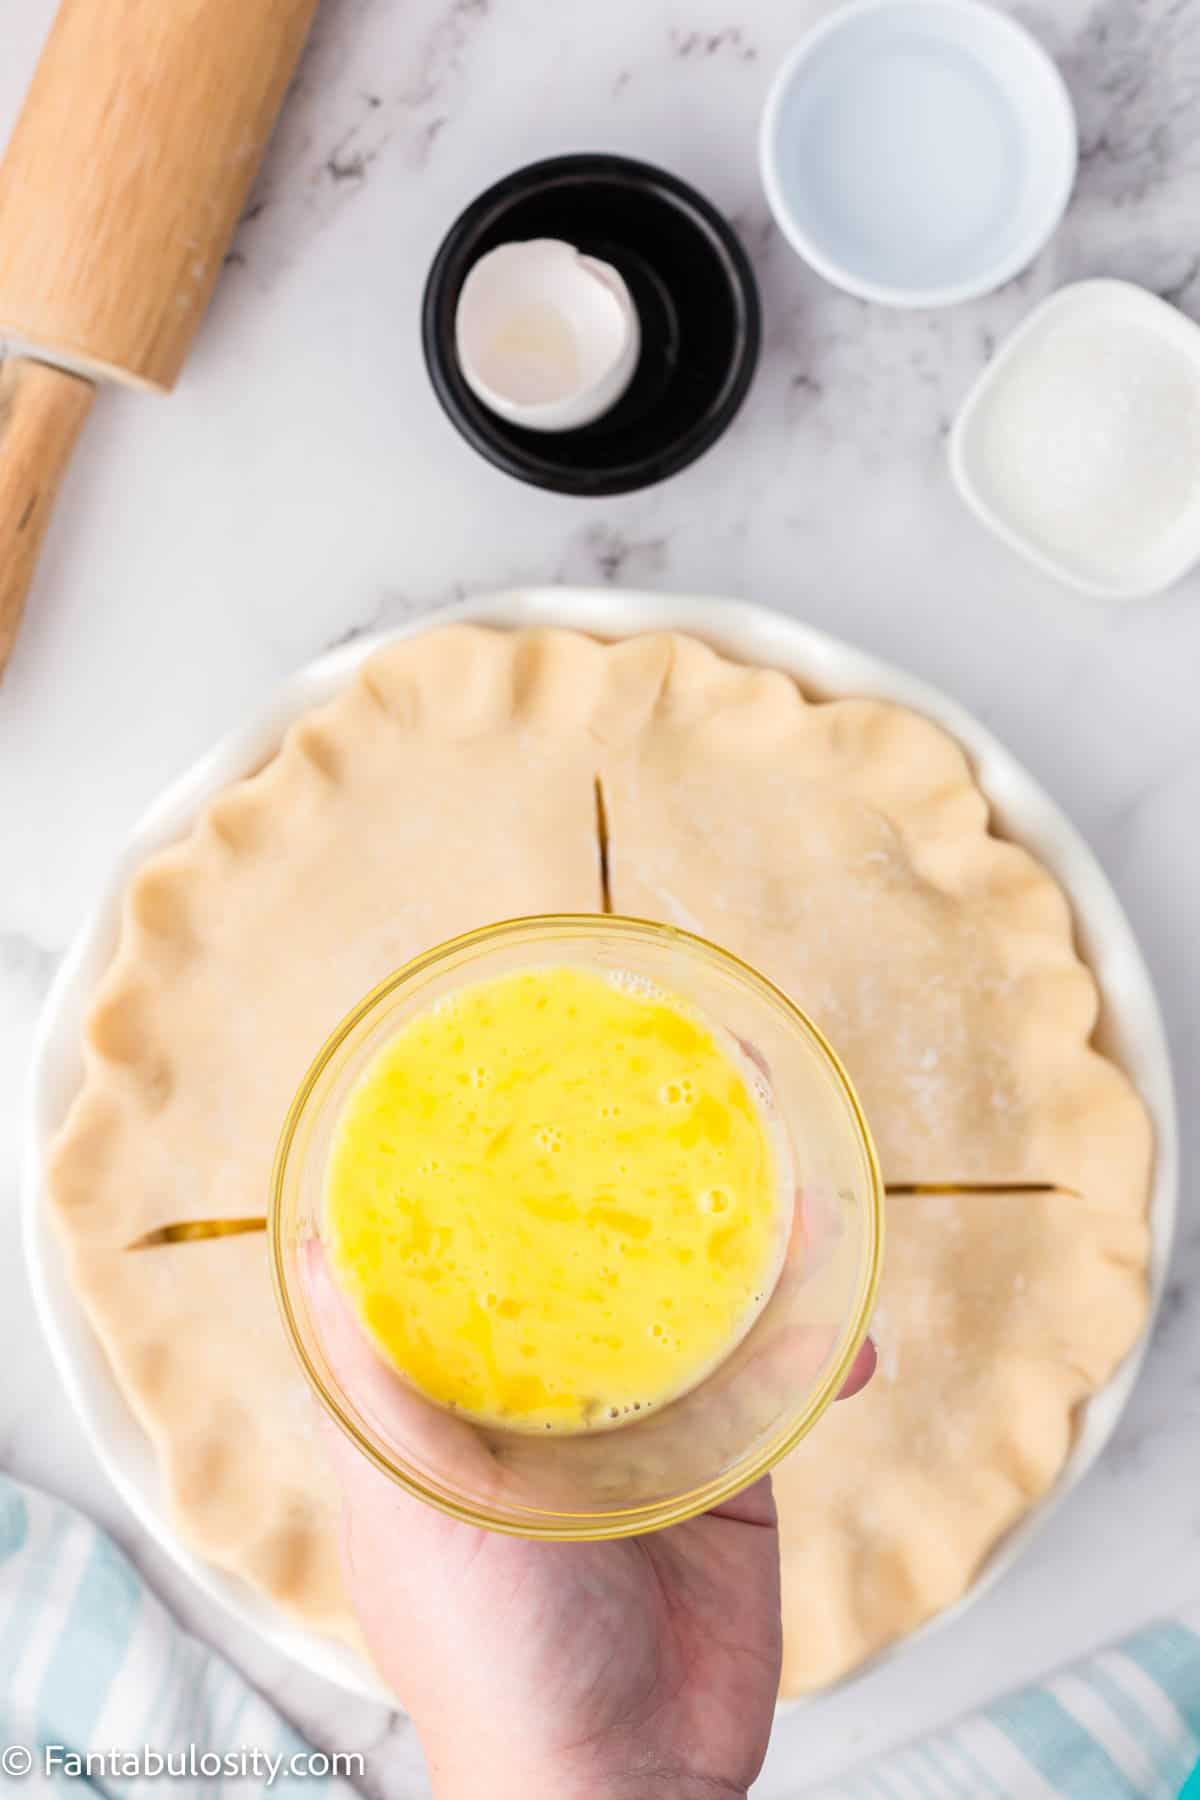 A bowl of egg wash being held above an unbaked pie.